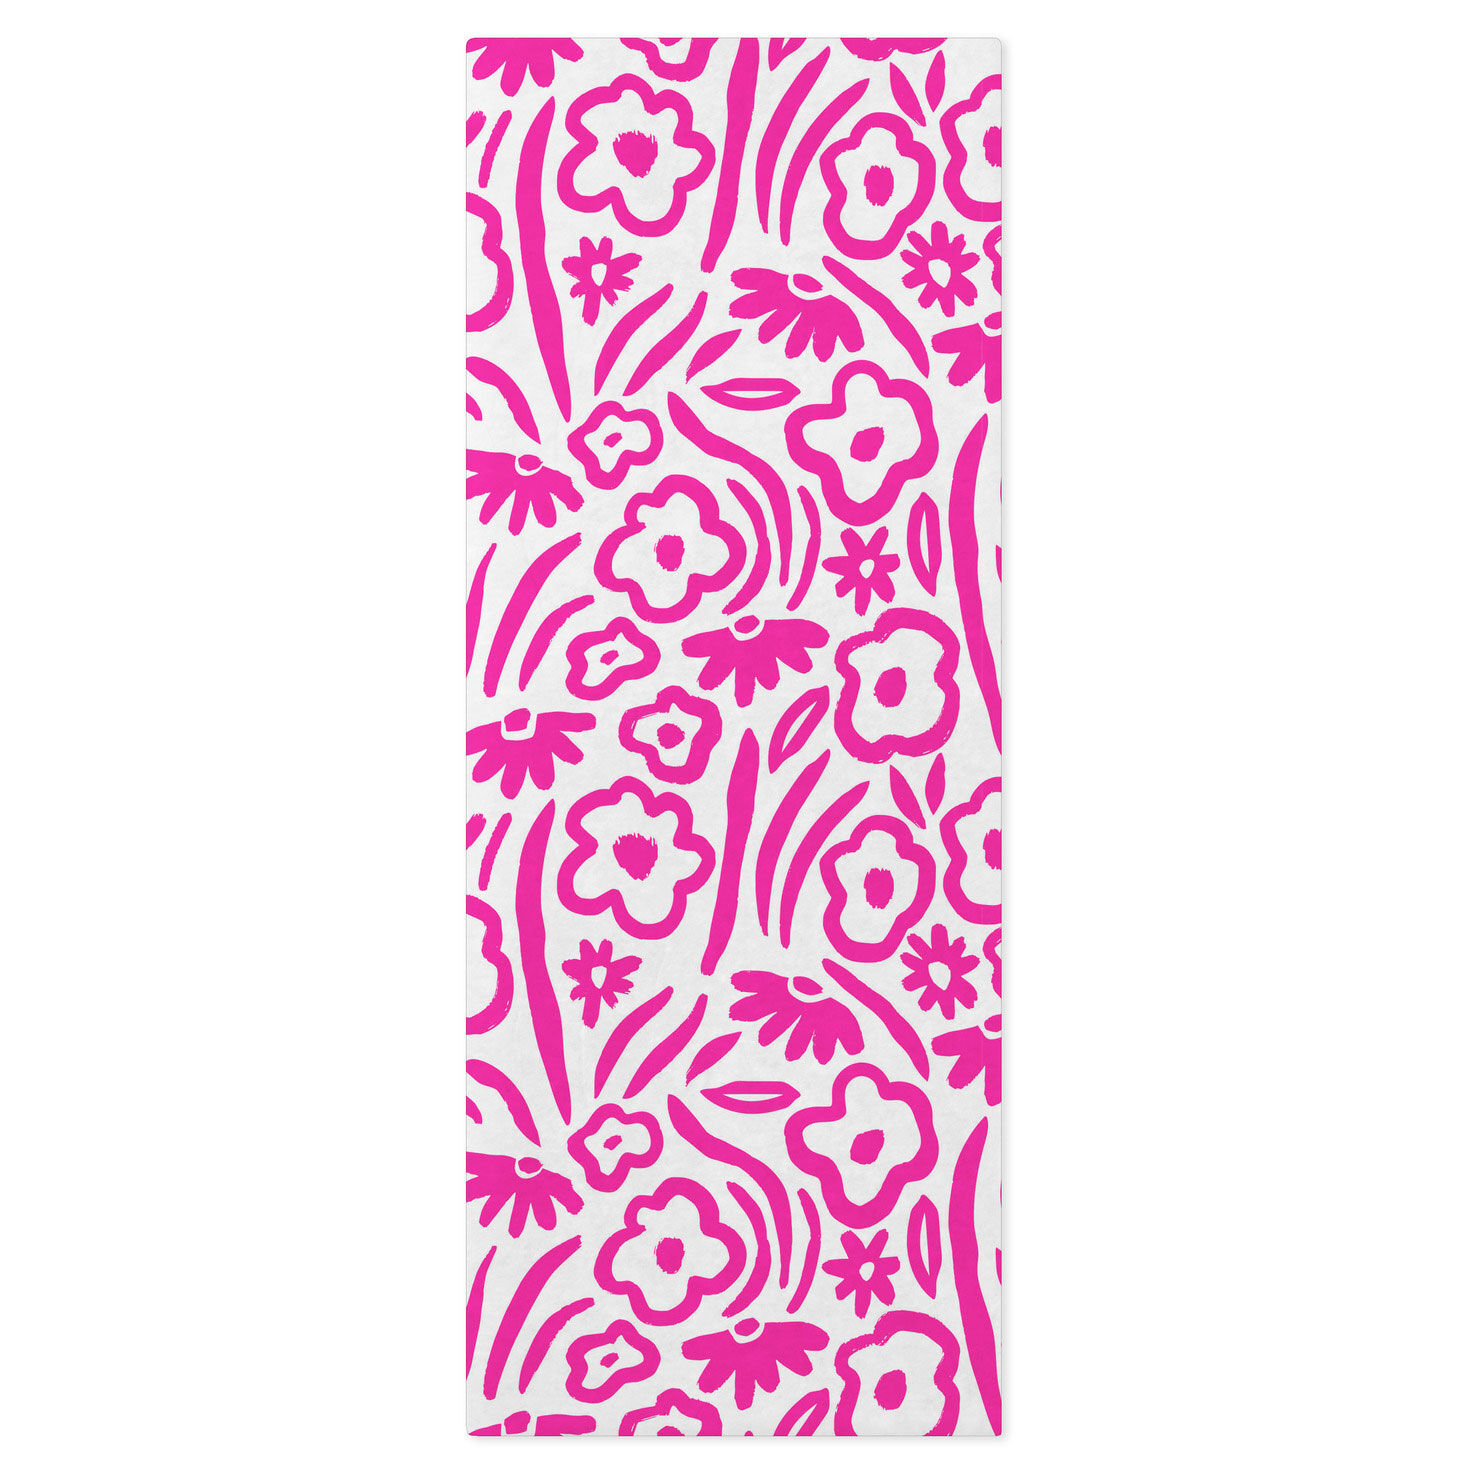 Floral Pink on White Tissue Paper, 6 Sheets for only USD 1.99 | Hallmark